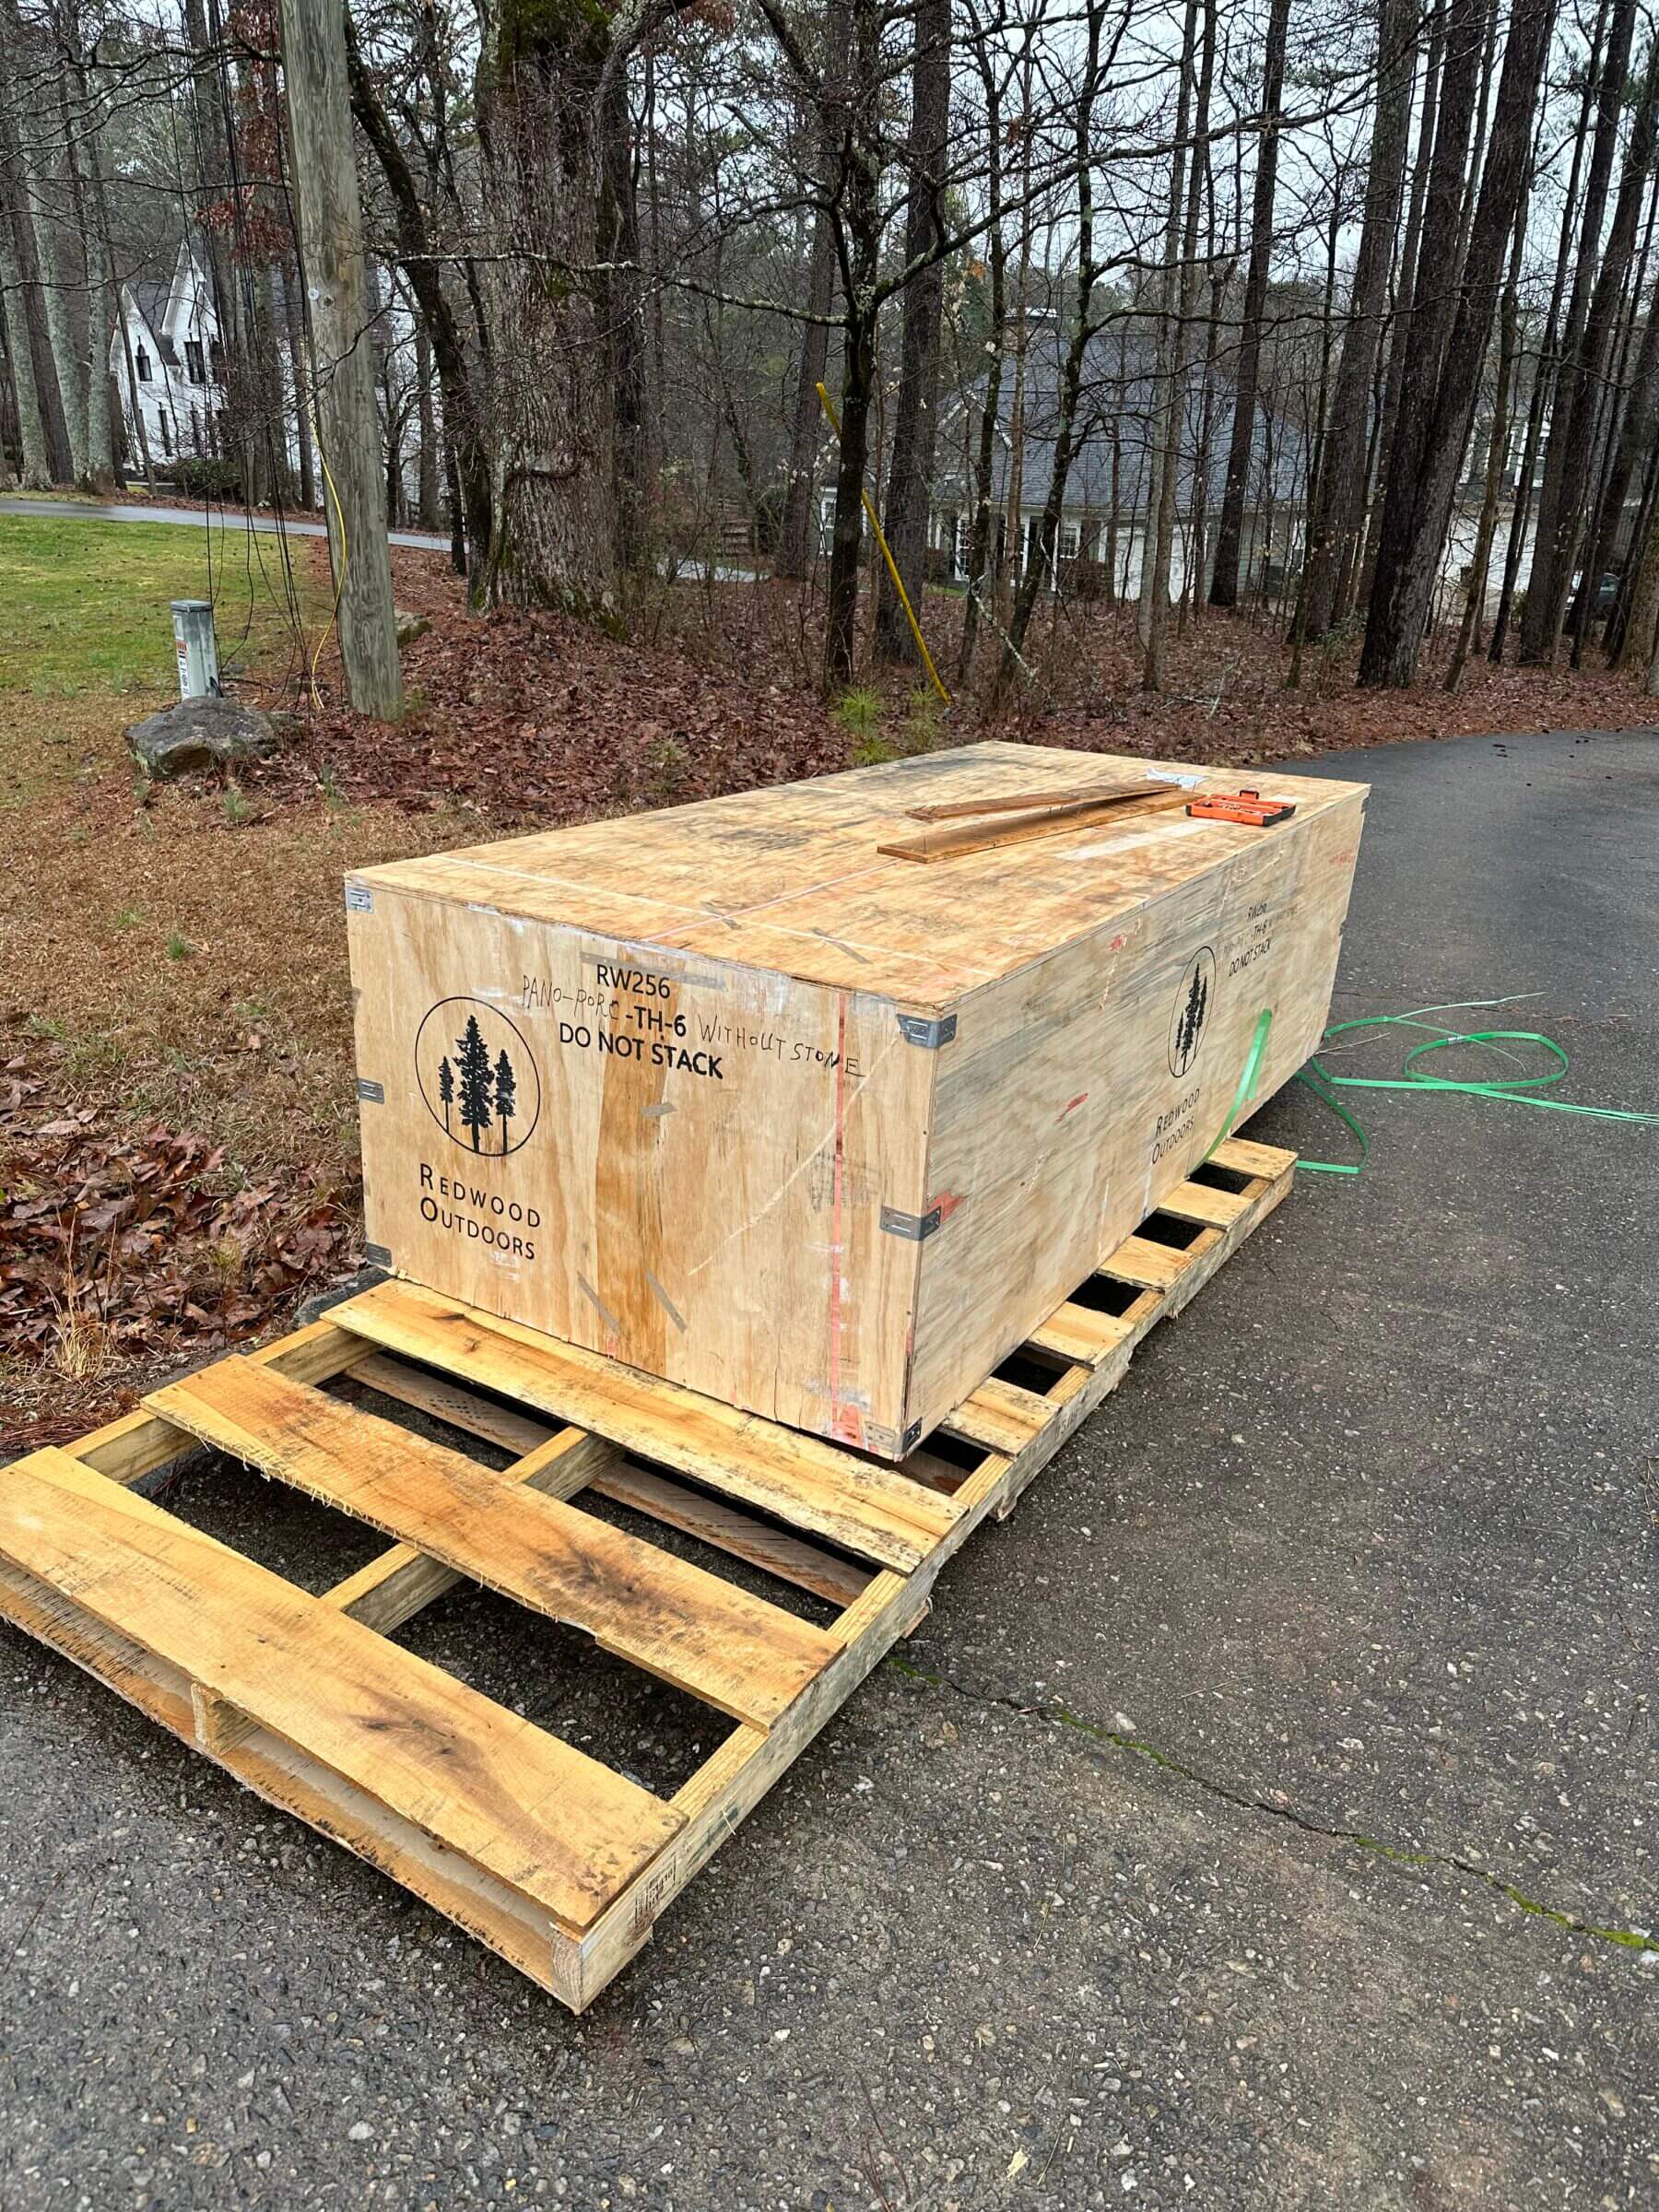 The delivery driver dropped this 800-pound box off at the end of our driveway.